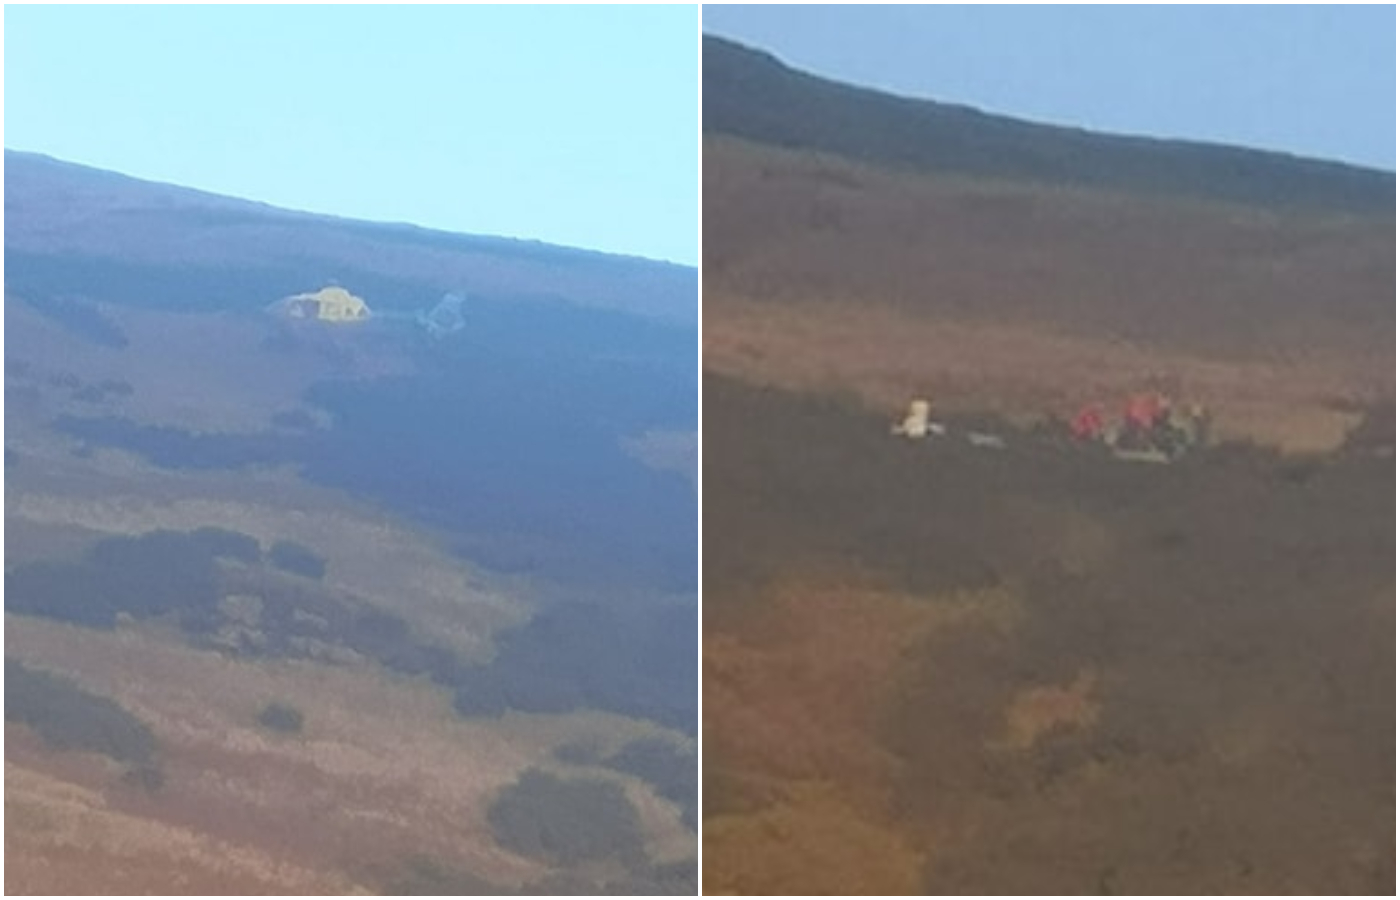 Air ambulance attending after a glider crashed into a hillside in Kinross.